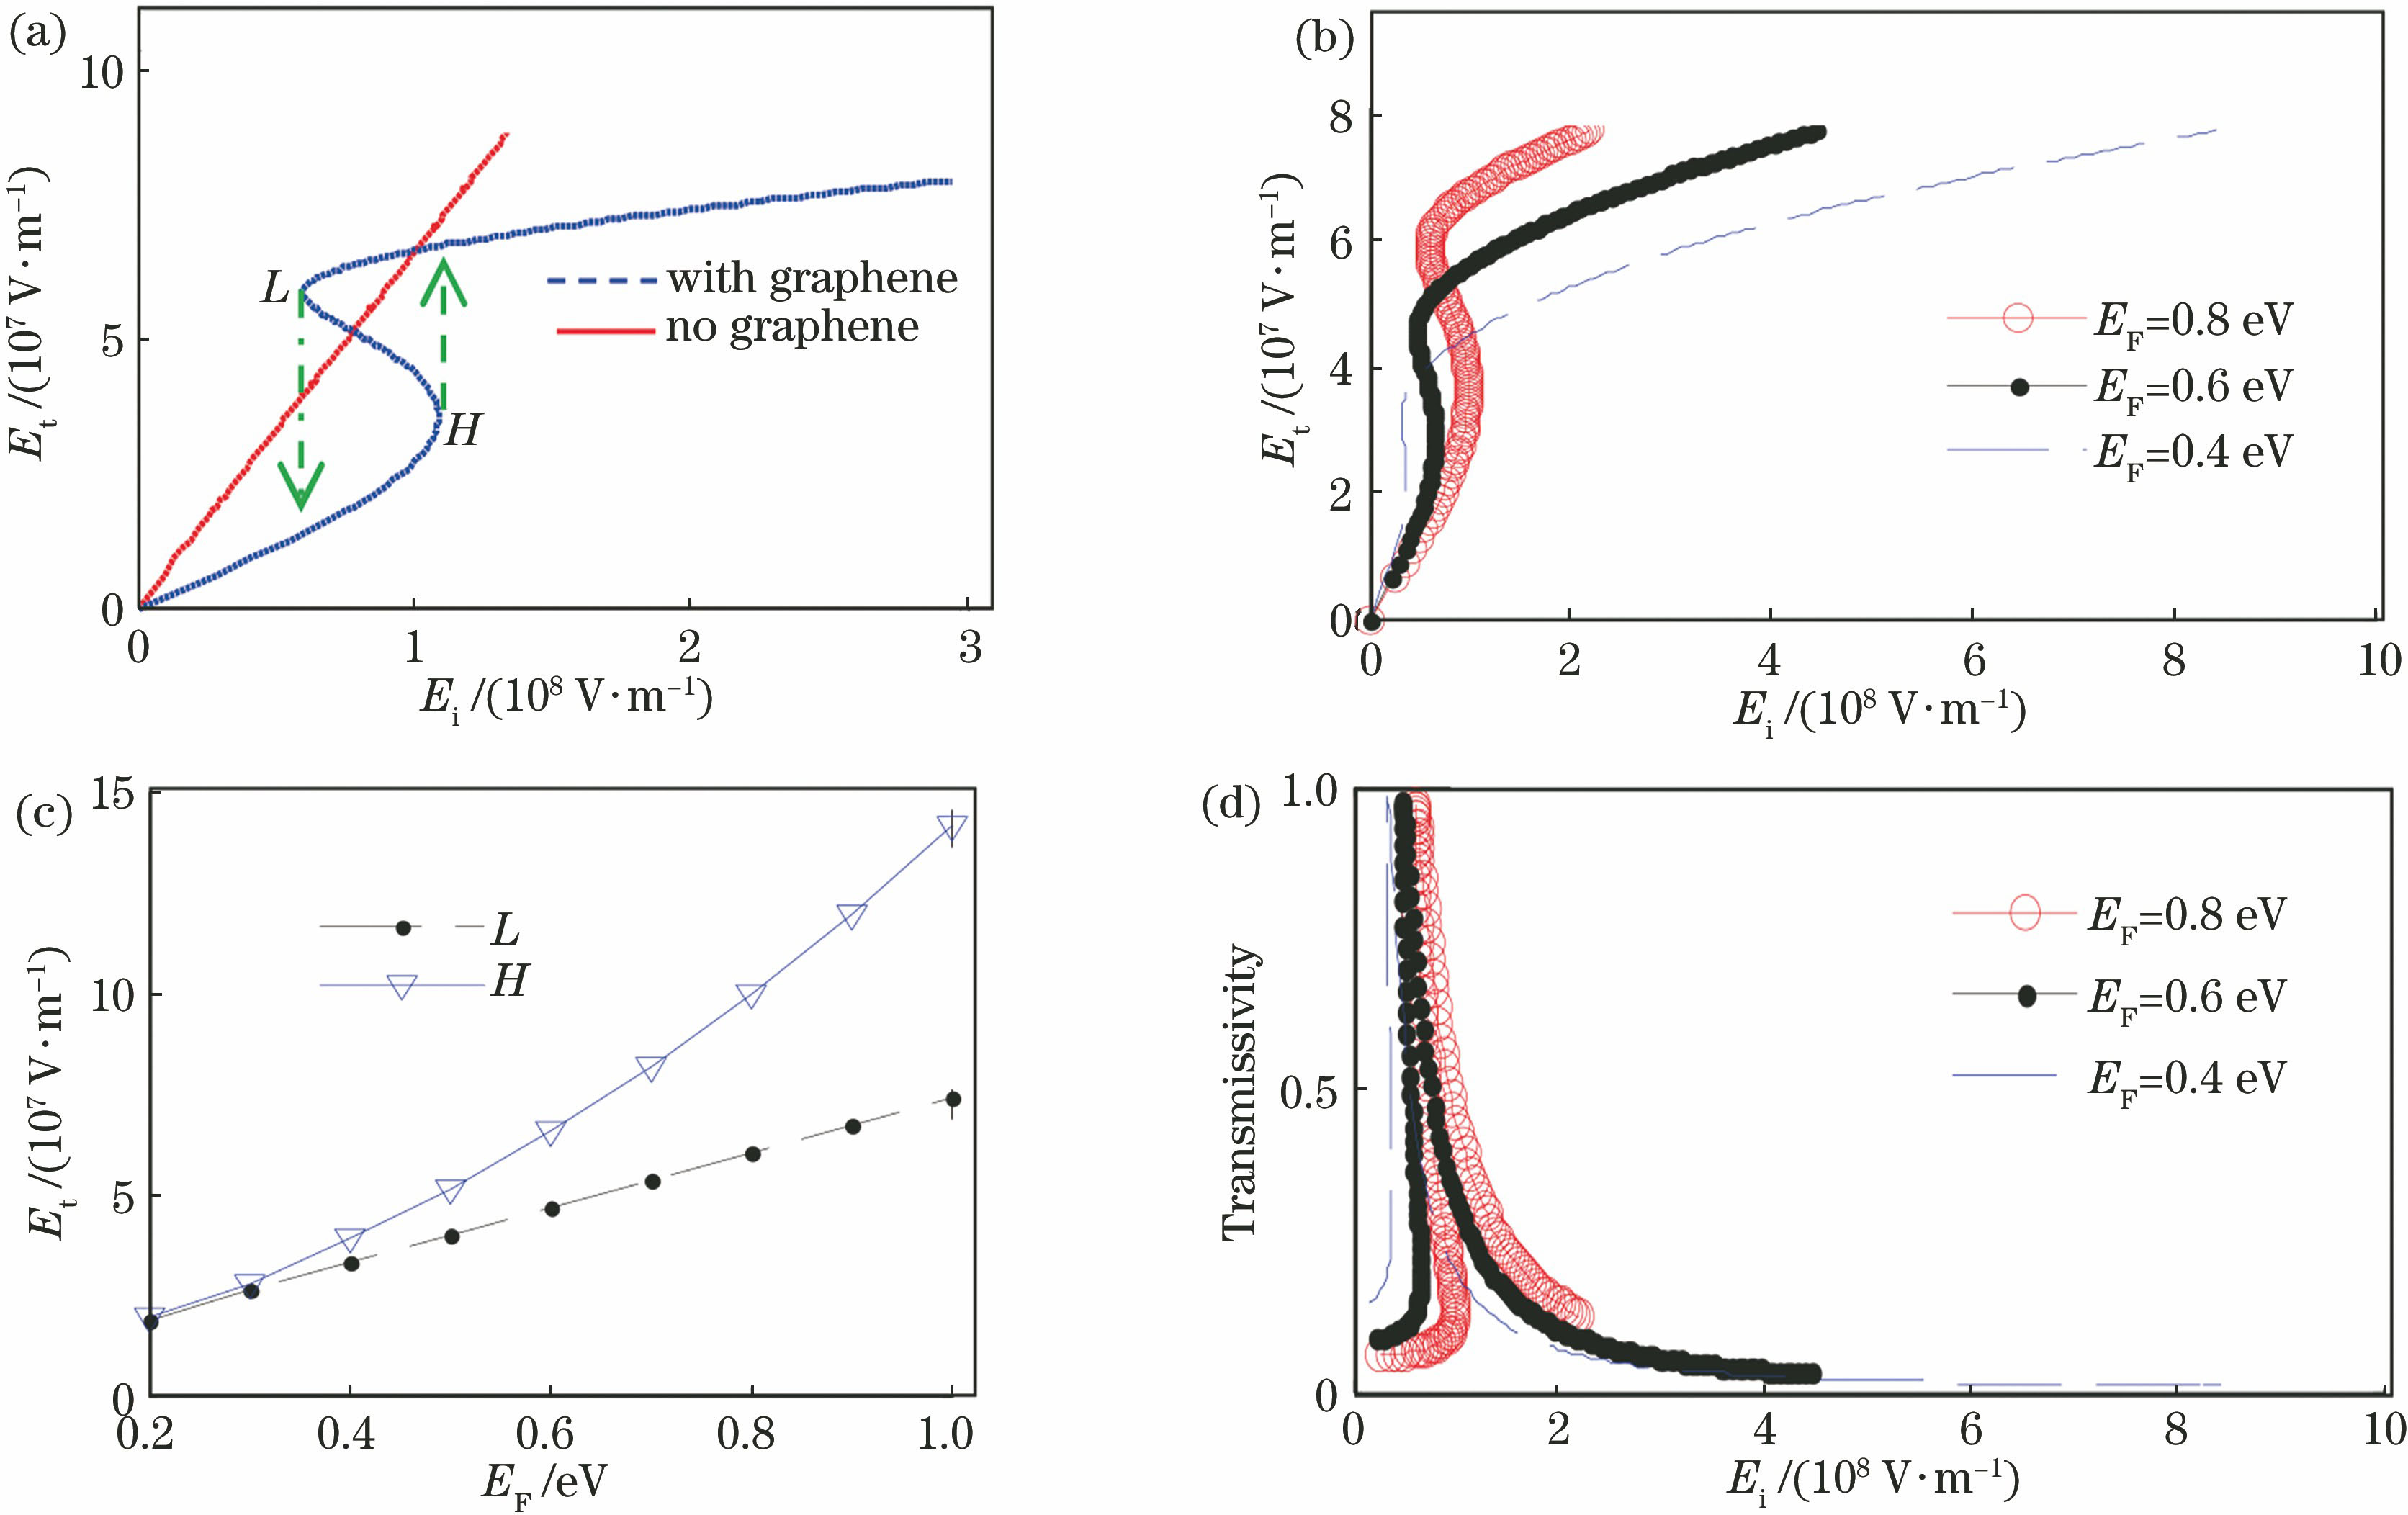 Optical bistability varies with Fermi energy. (a) Relation between amplitude of incident light and the amplitude of transmission light whether the graphene exists third-order nonlinearity or not; (b) relation between amplitude of incident light and amplitude of transmission light; (c) influence of Fermi energy on optical bistability threshold; (d) relation between transmissivity and amplitude of incident light